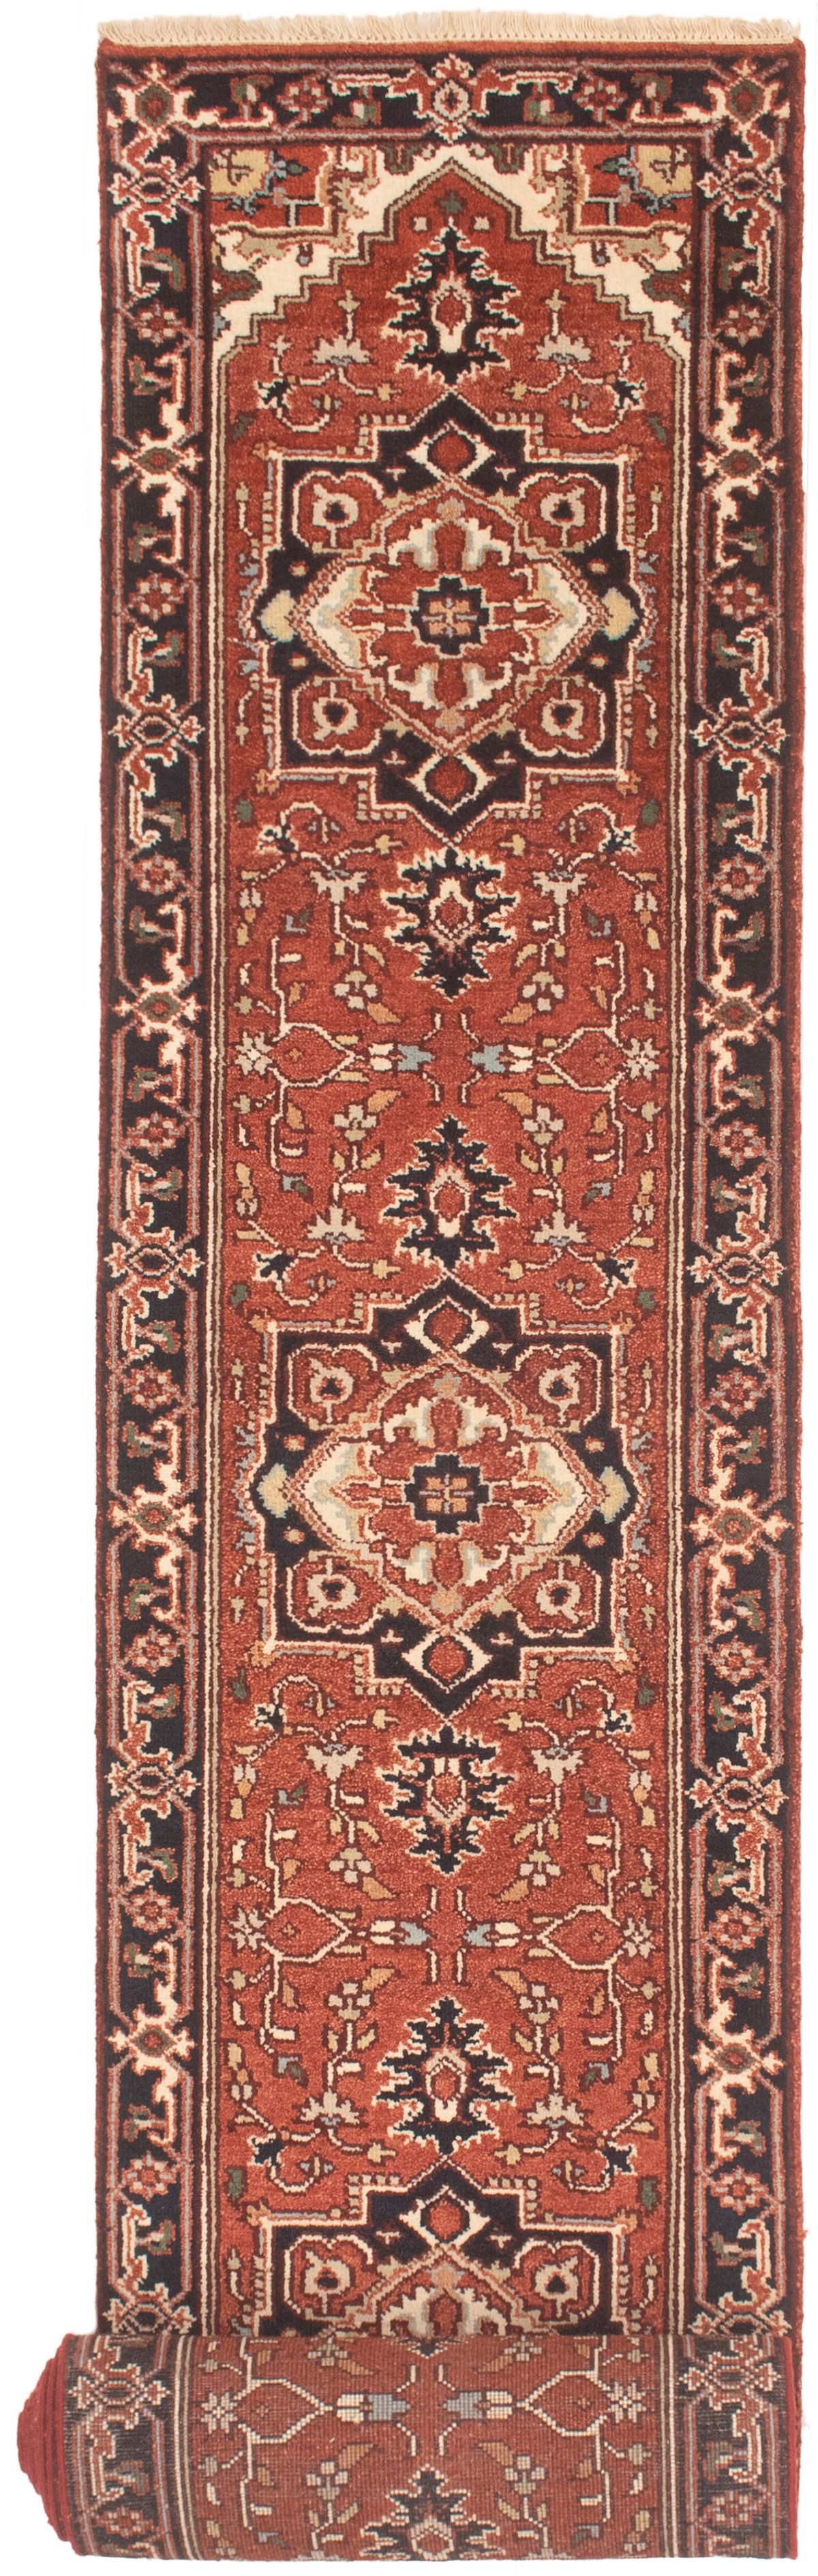 Hand-knotted Serapi Heritage Copper Wool Rug 2'6" x 19'8"  Size: 2'6" x 19'8"  